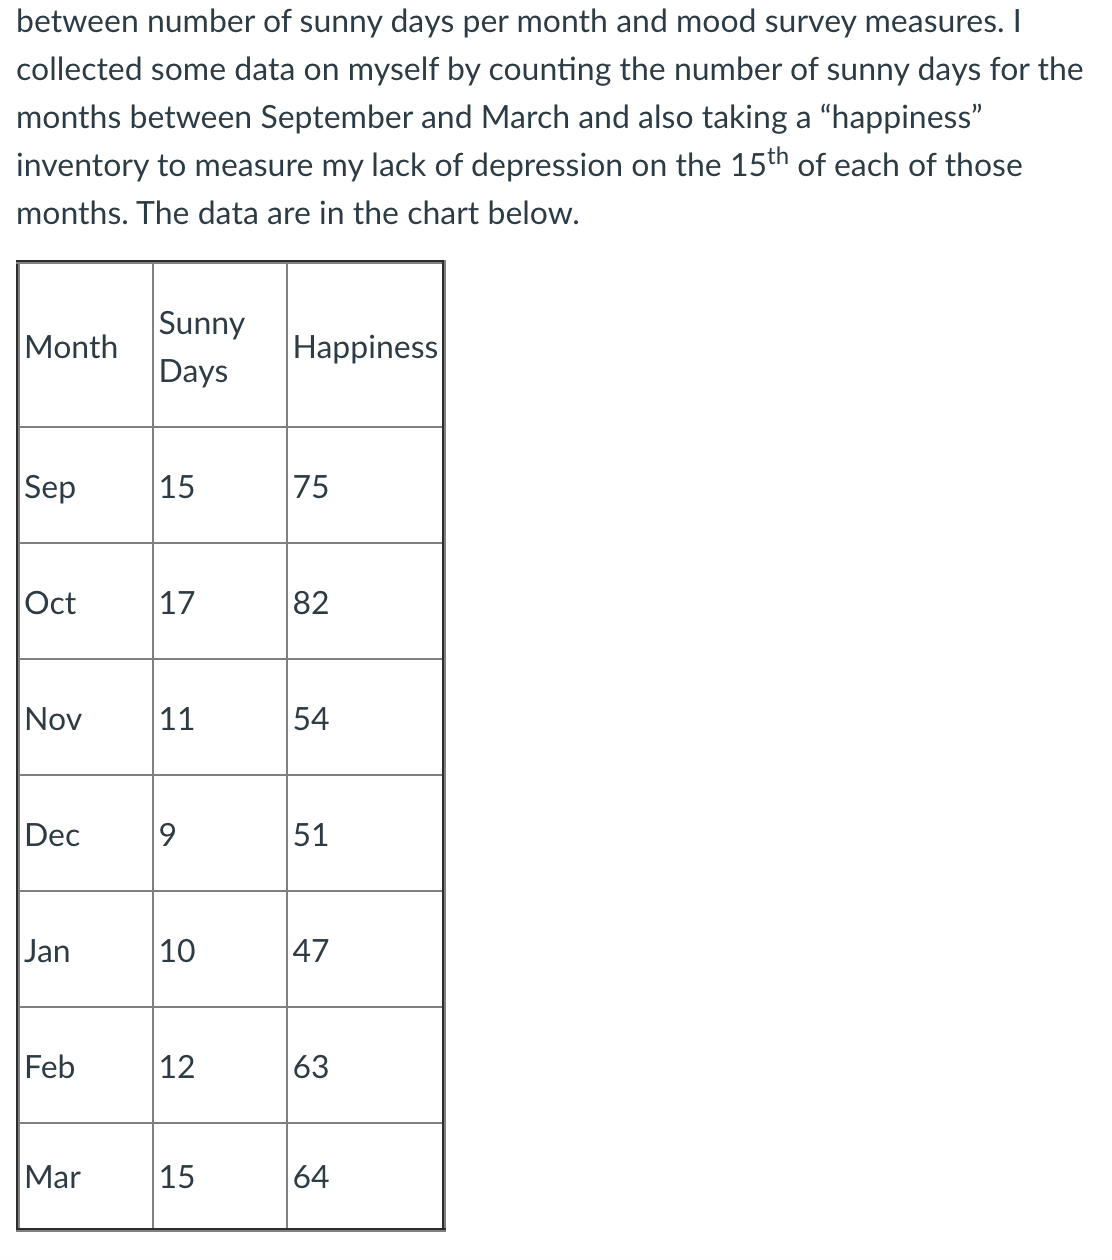 between number of sunny days per month and mood survey measures.
collected some data on myself by counting the number of sunny days for the
months between September and March and also taking a "happiness"
inventory to measure my lack of depression on the 15th of each of those
months. The data are in the chart below.
Sunny
Days
Month
Happiness
Sep
15
75
Oct
17
82
Nov
11
54
Dec
51
Jan
10
47
Feb
12
63
Mar
15
64
